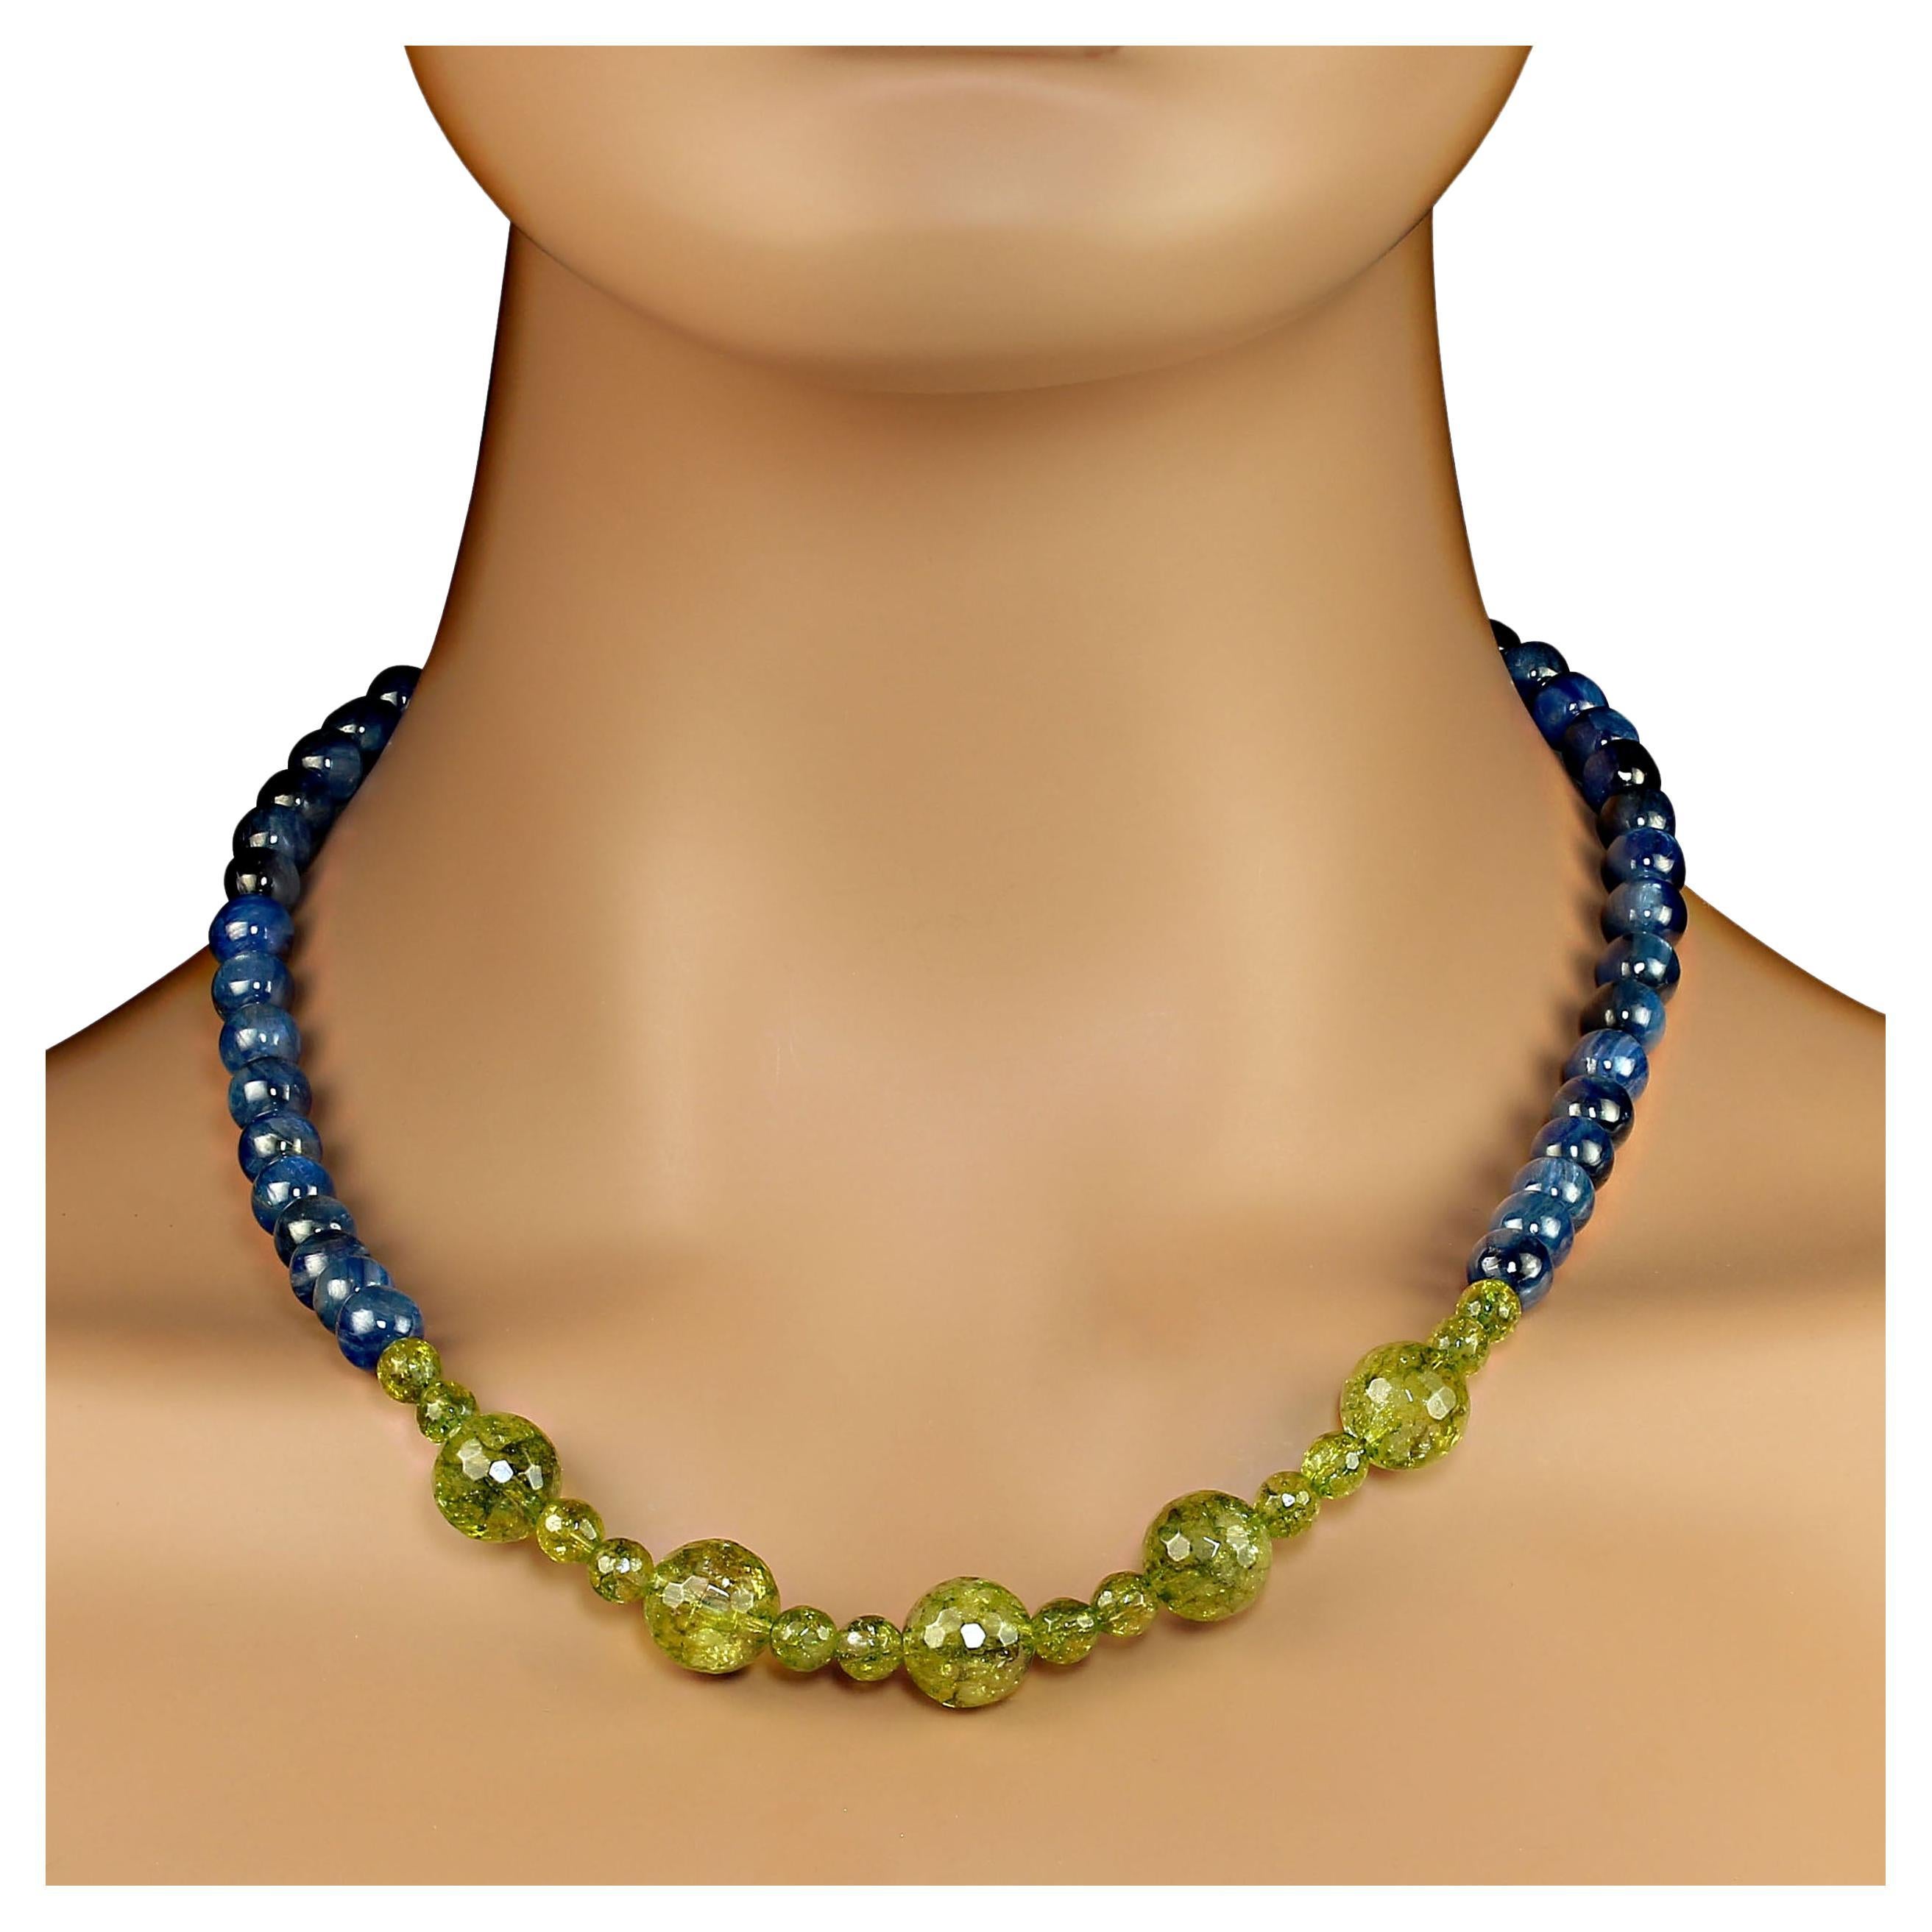 AJD 19 Inch Unique Peridot and Kyanite Necklace Perfect for Winter  Great Gift! For Sale